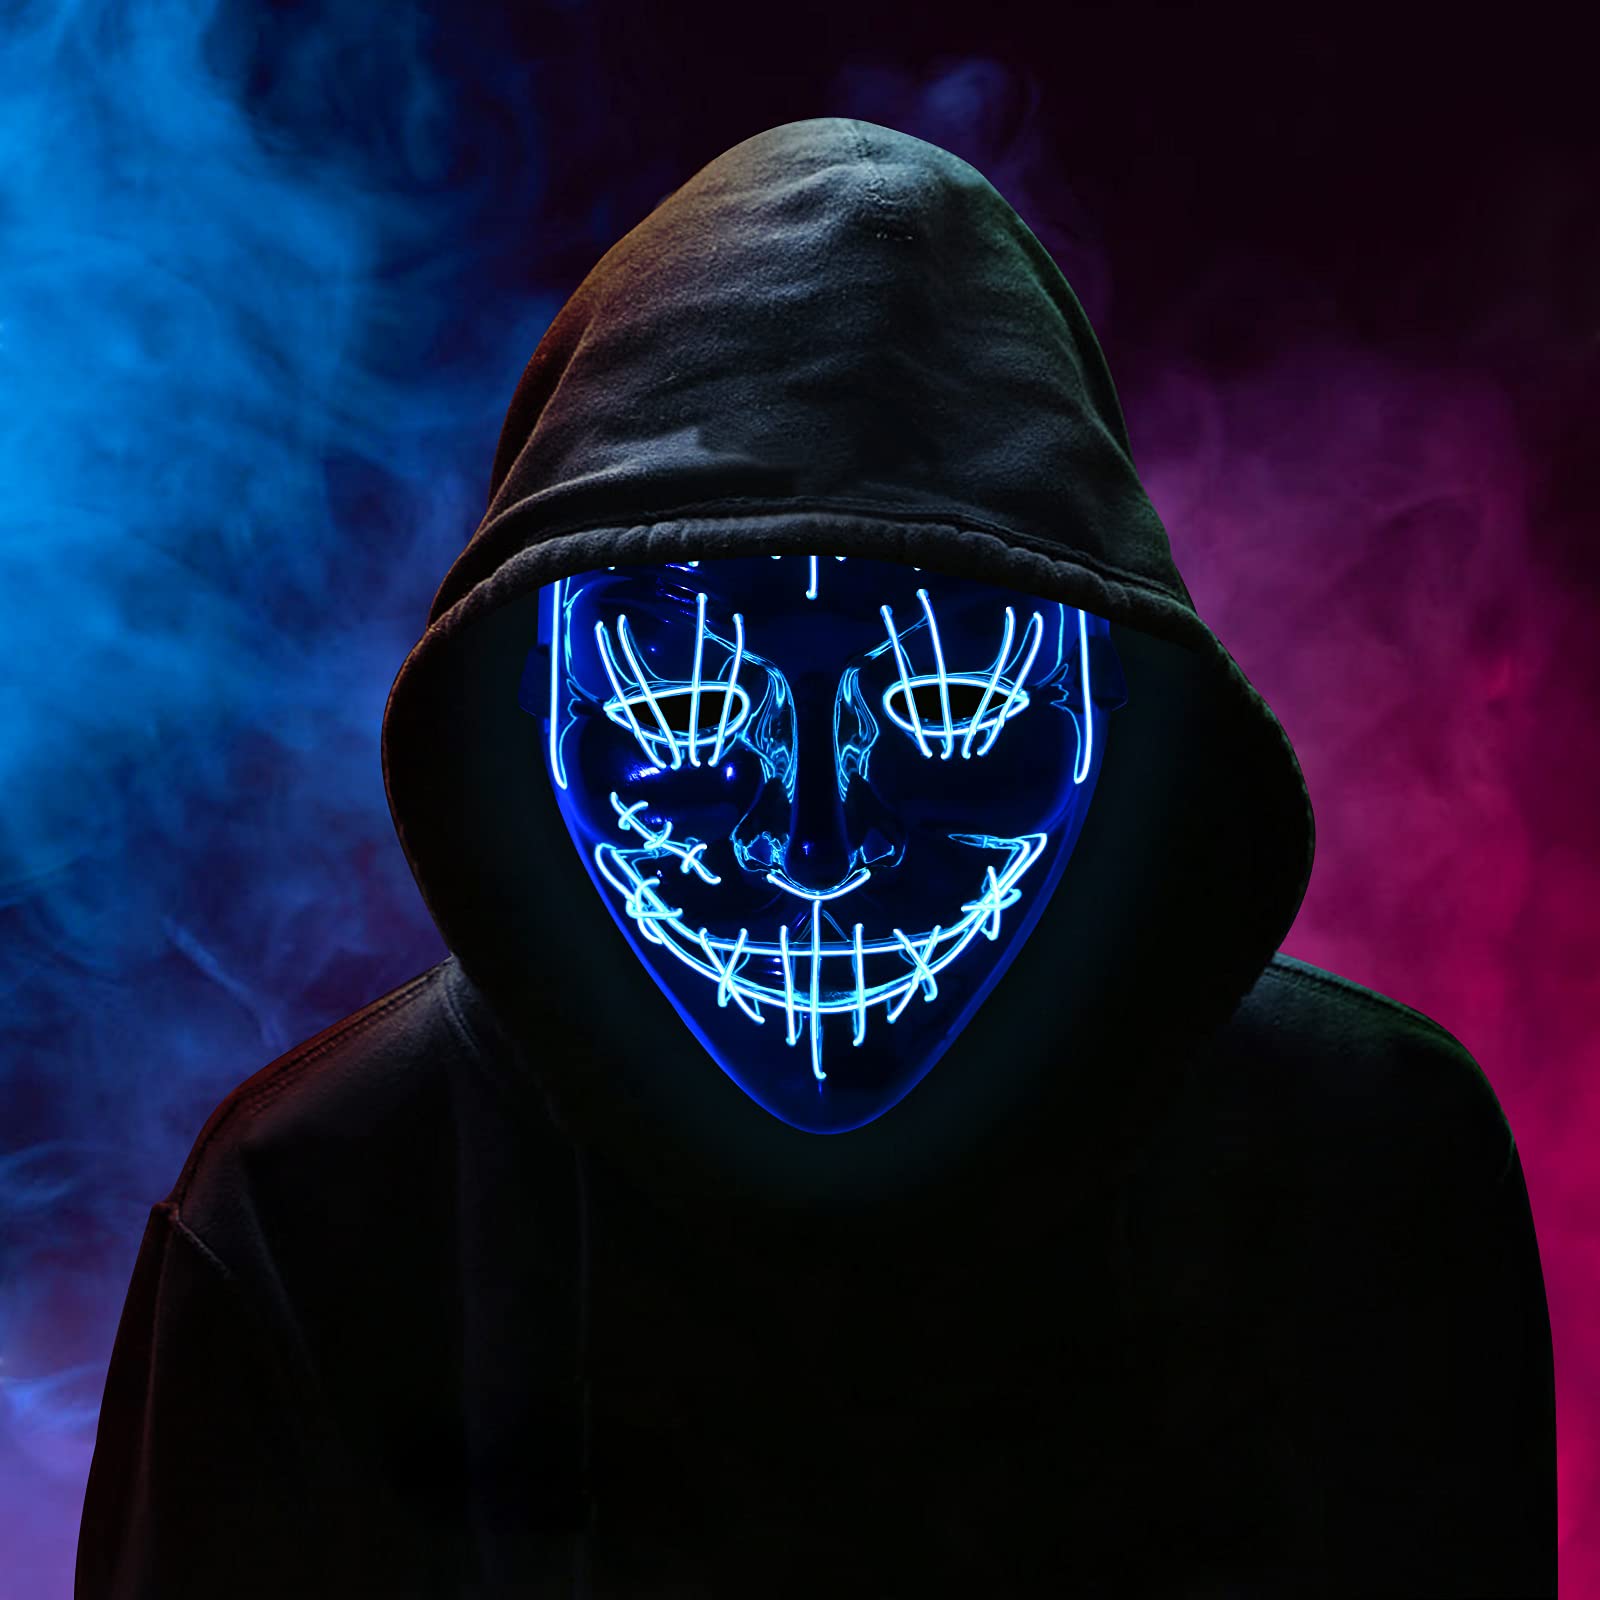 Dodosky Scary Mask, Led Light Up Mask Halloween Mask Cosplay Mask Purge Mask for Halloween Festival Party